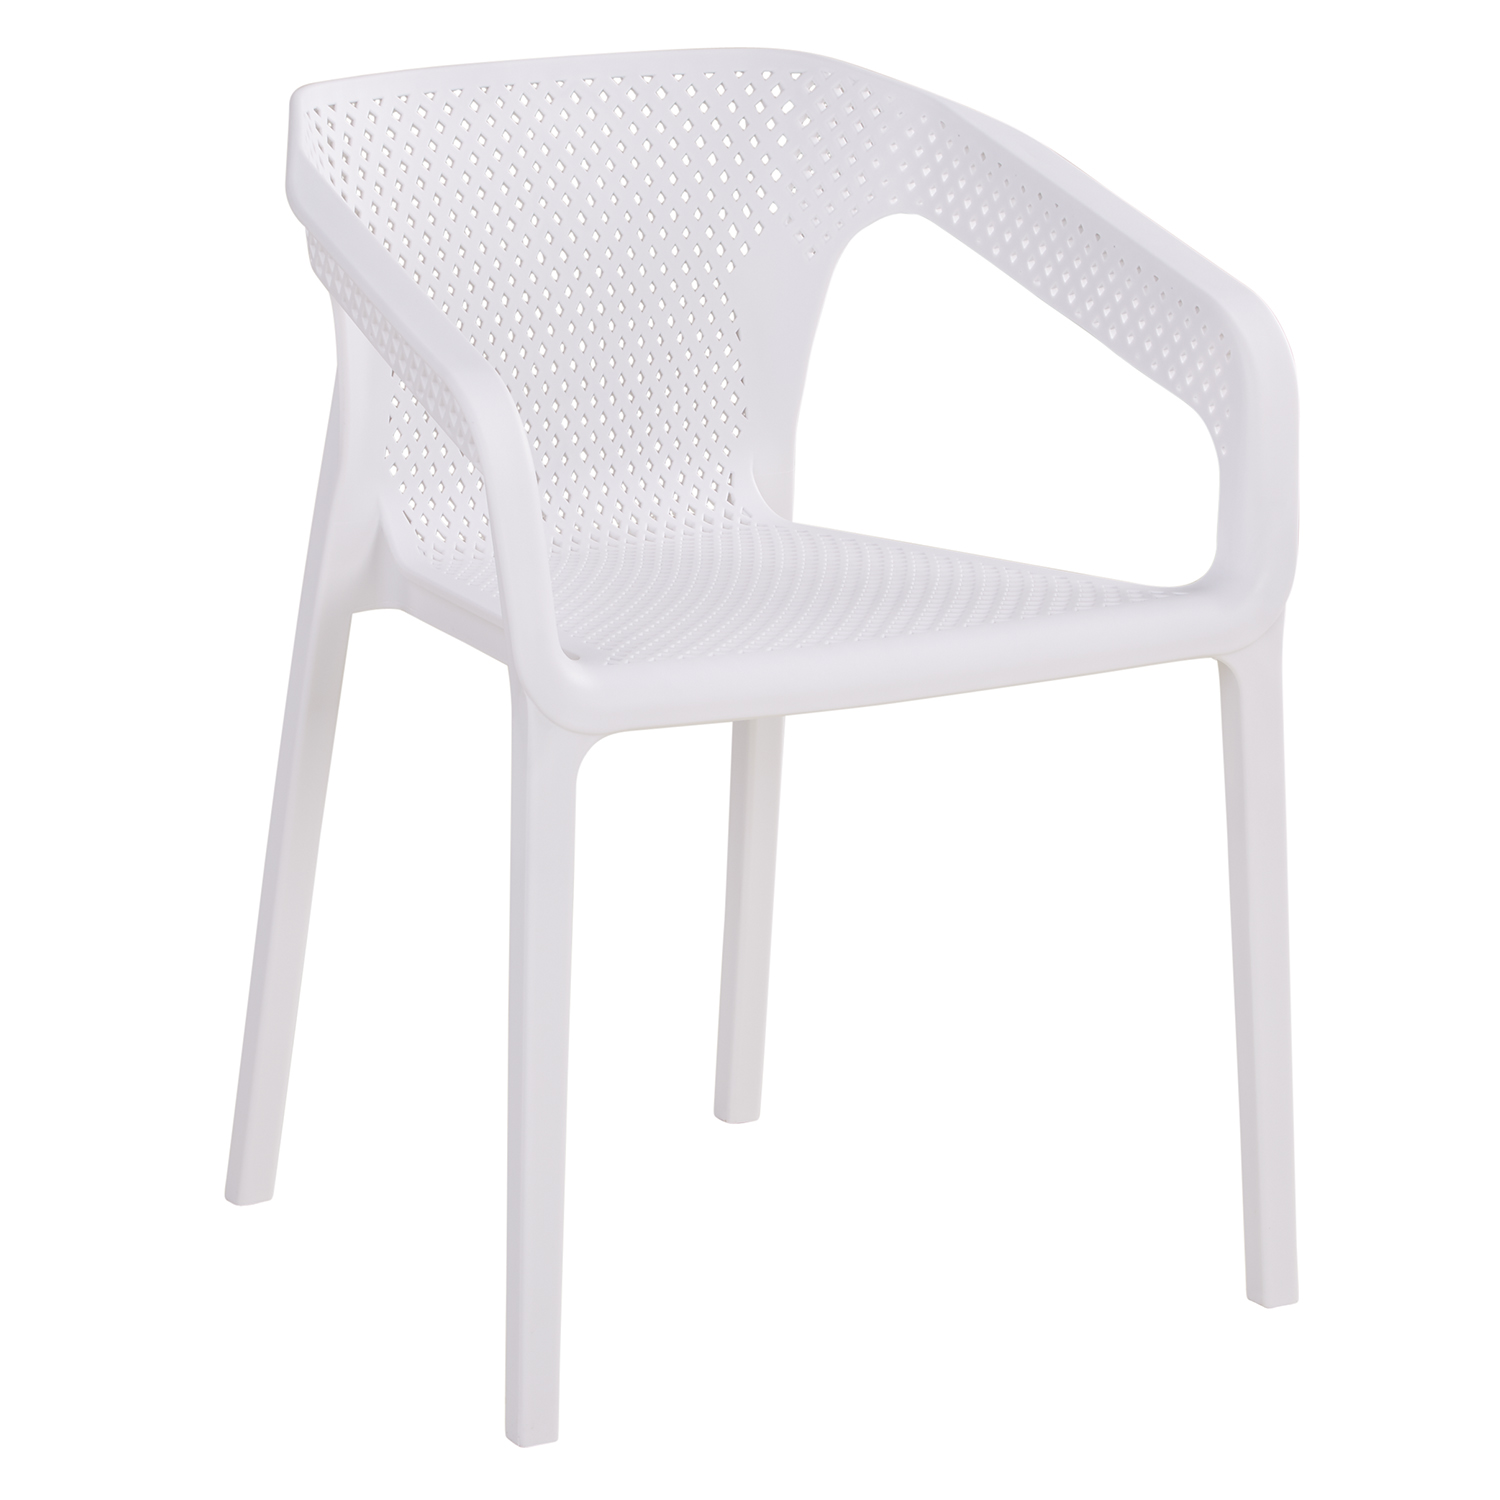 Set of 4 Garden chair with armrests Camping chairs White Outdoor chairs Plastic Egg chair Lounger chairs Stacking chairs